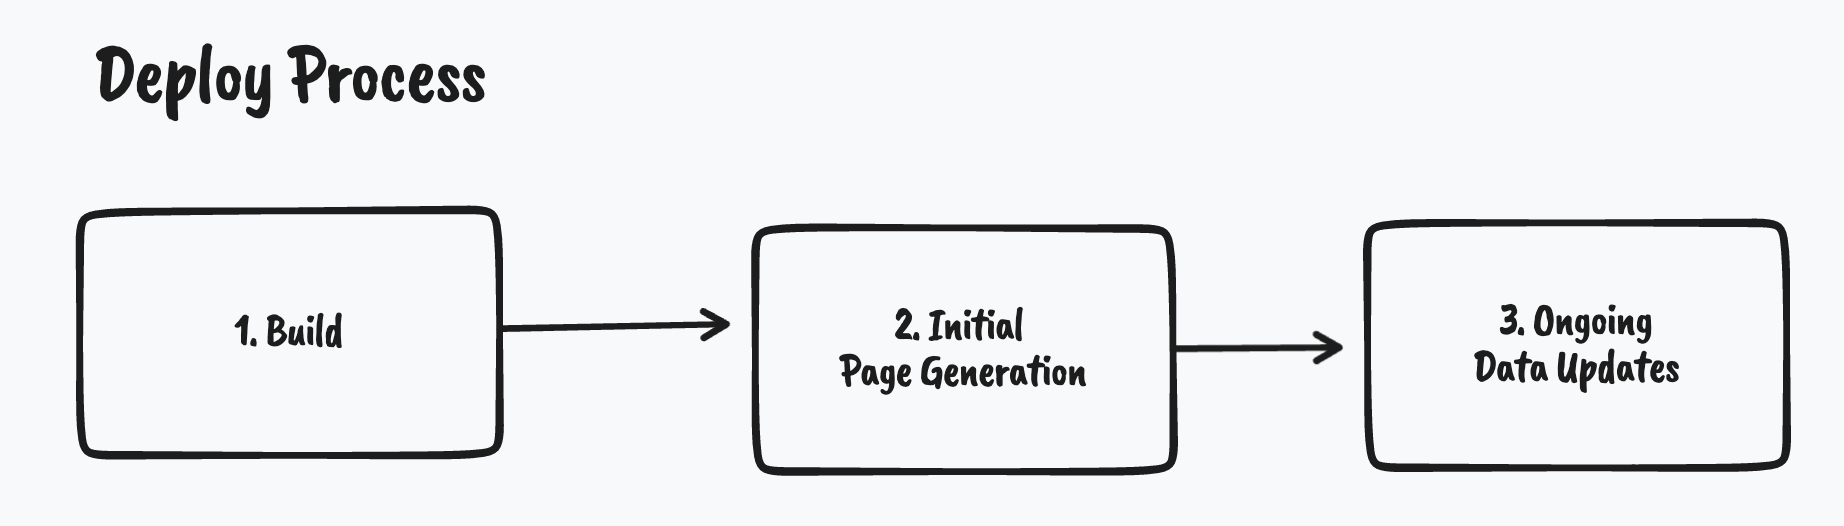 overview of pages deploy process